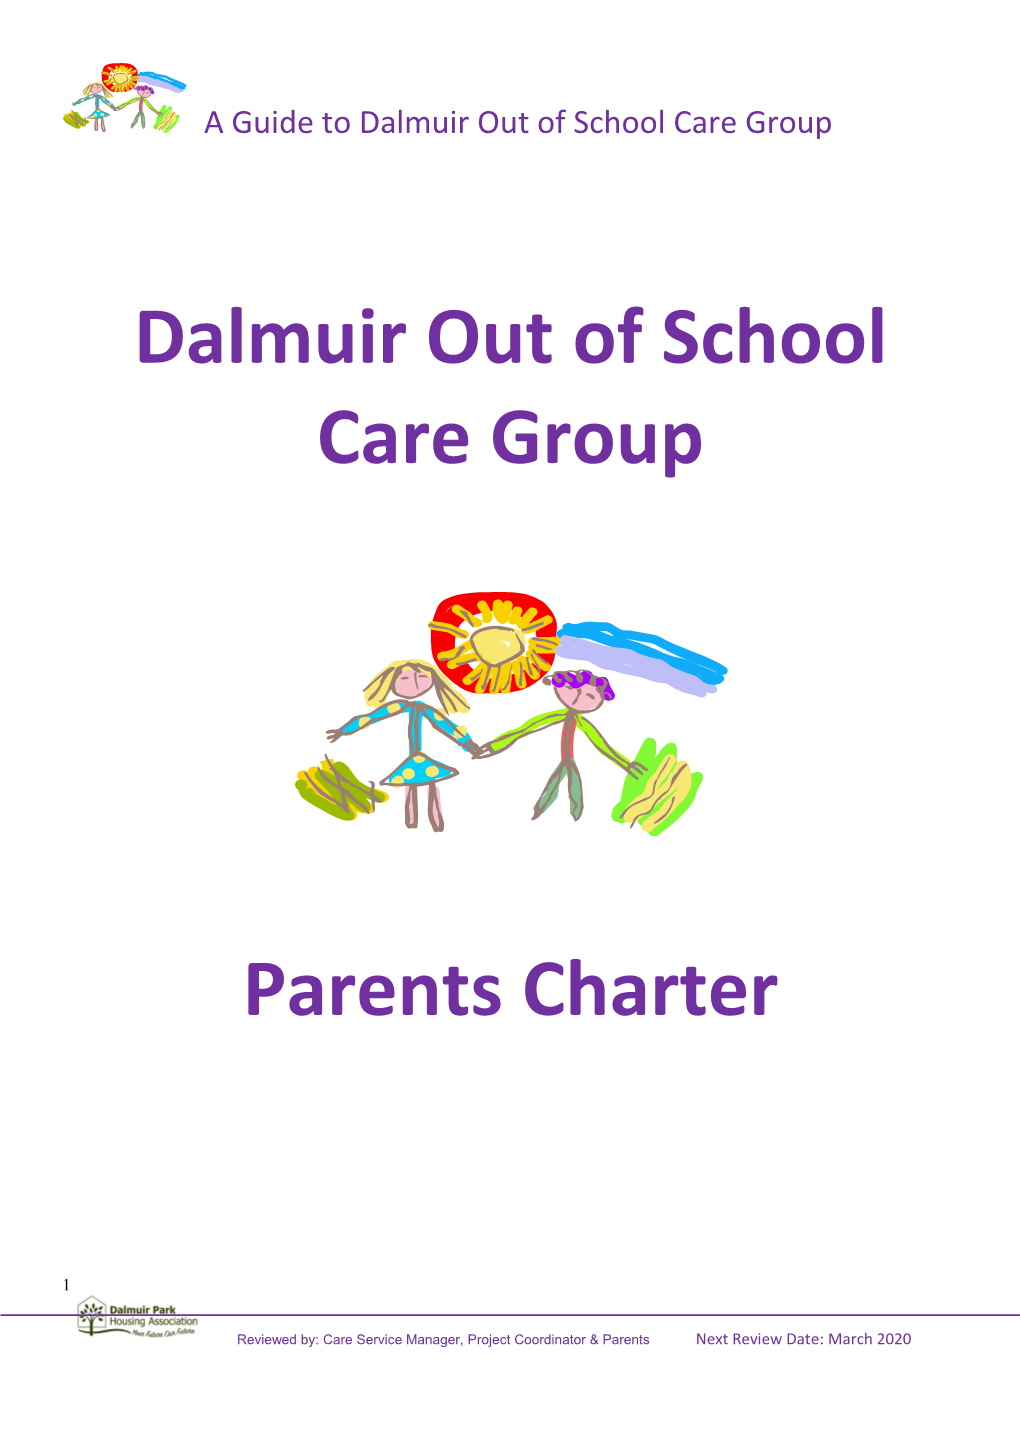 Dalmuir out of School Care Group Parents Charter